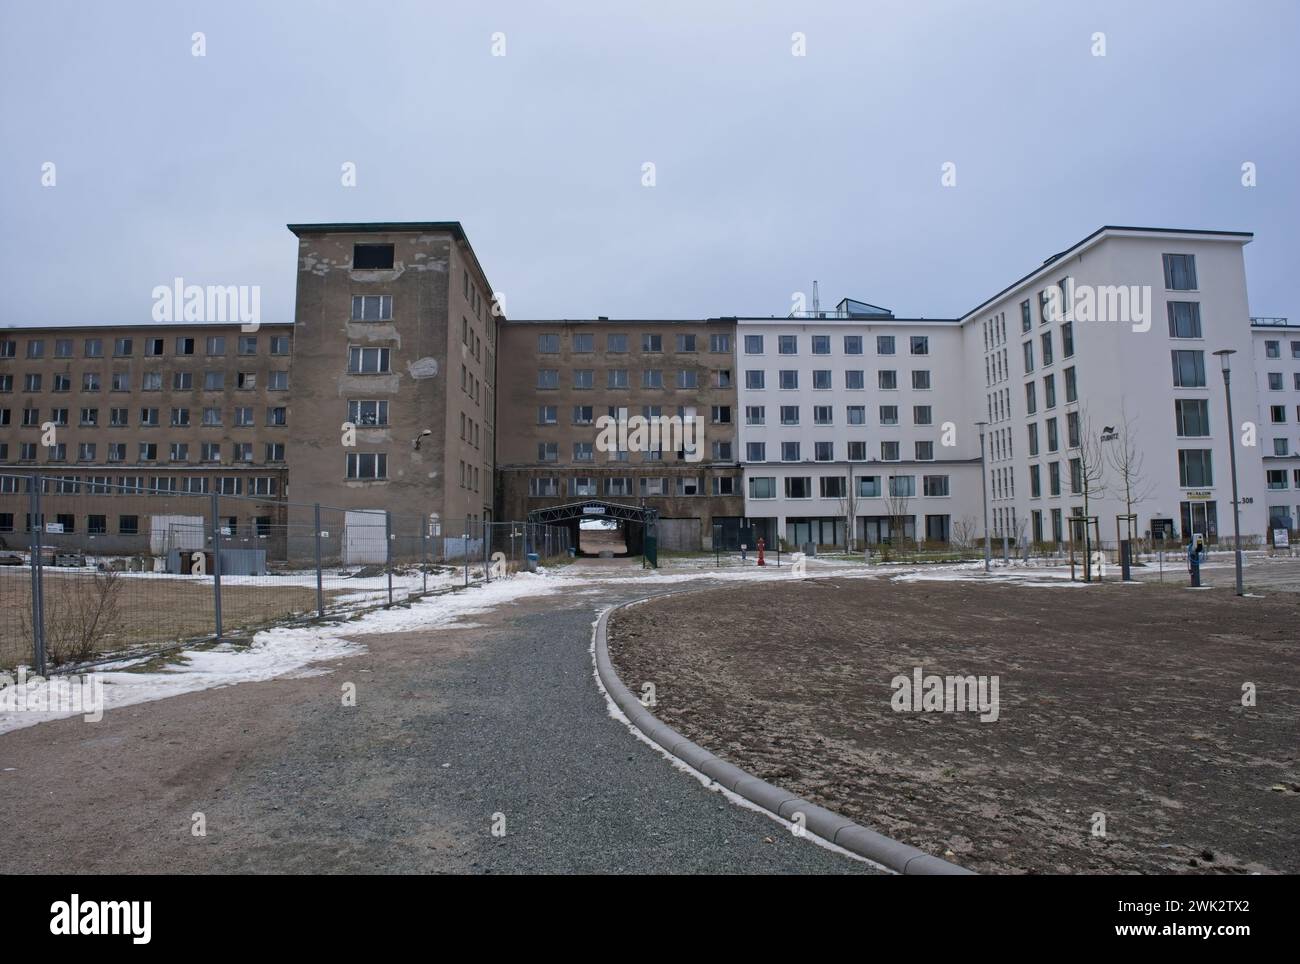 Binz, Germany - Jan 11, 2024: The Colossus of Prora was built by Nazi Germany between 1936 and 1939 as part of the Strength Through Joy project. Cloud Stock Photo